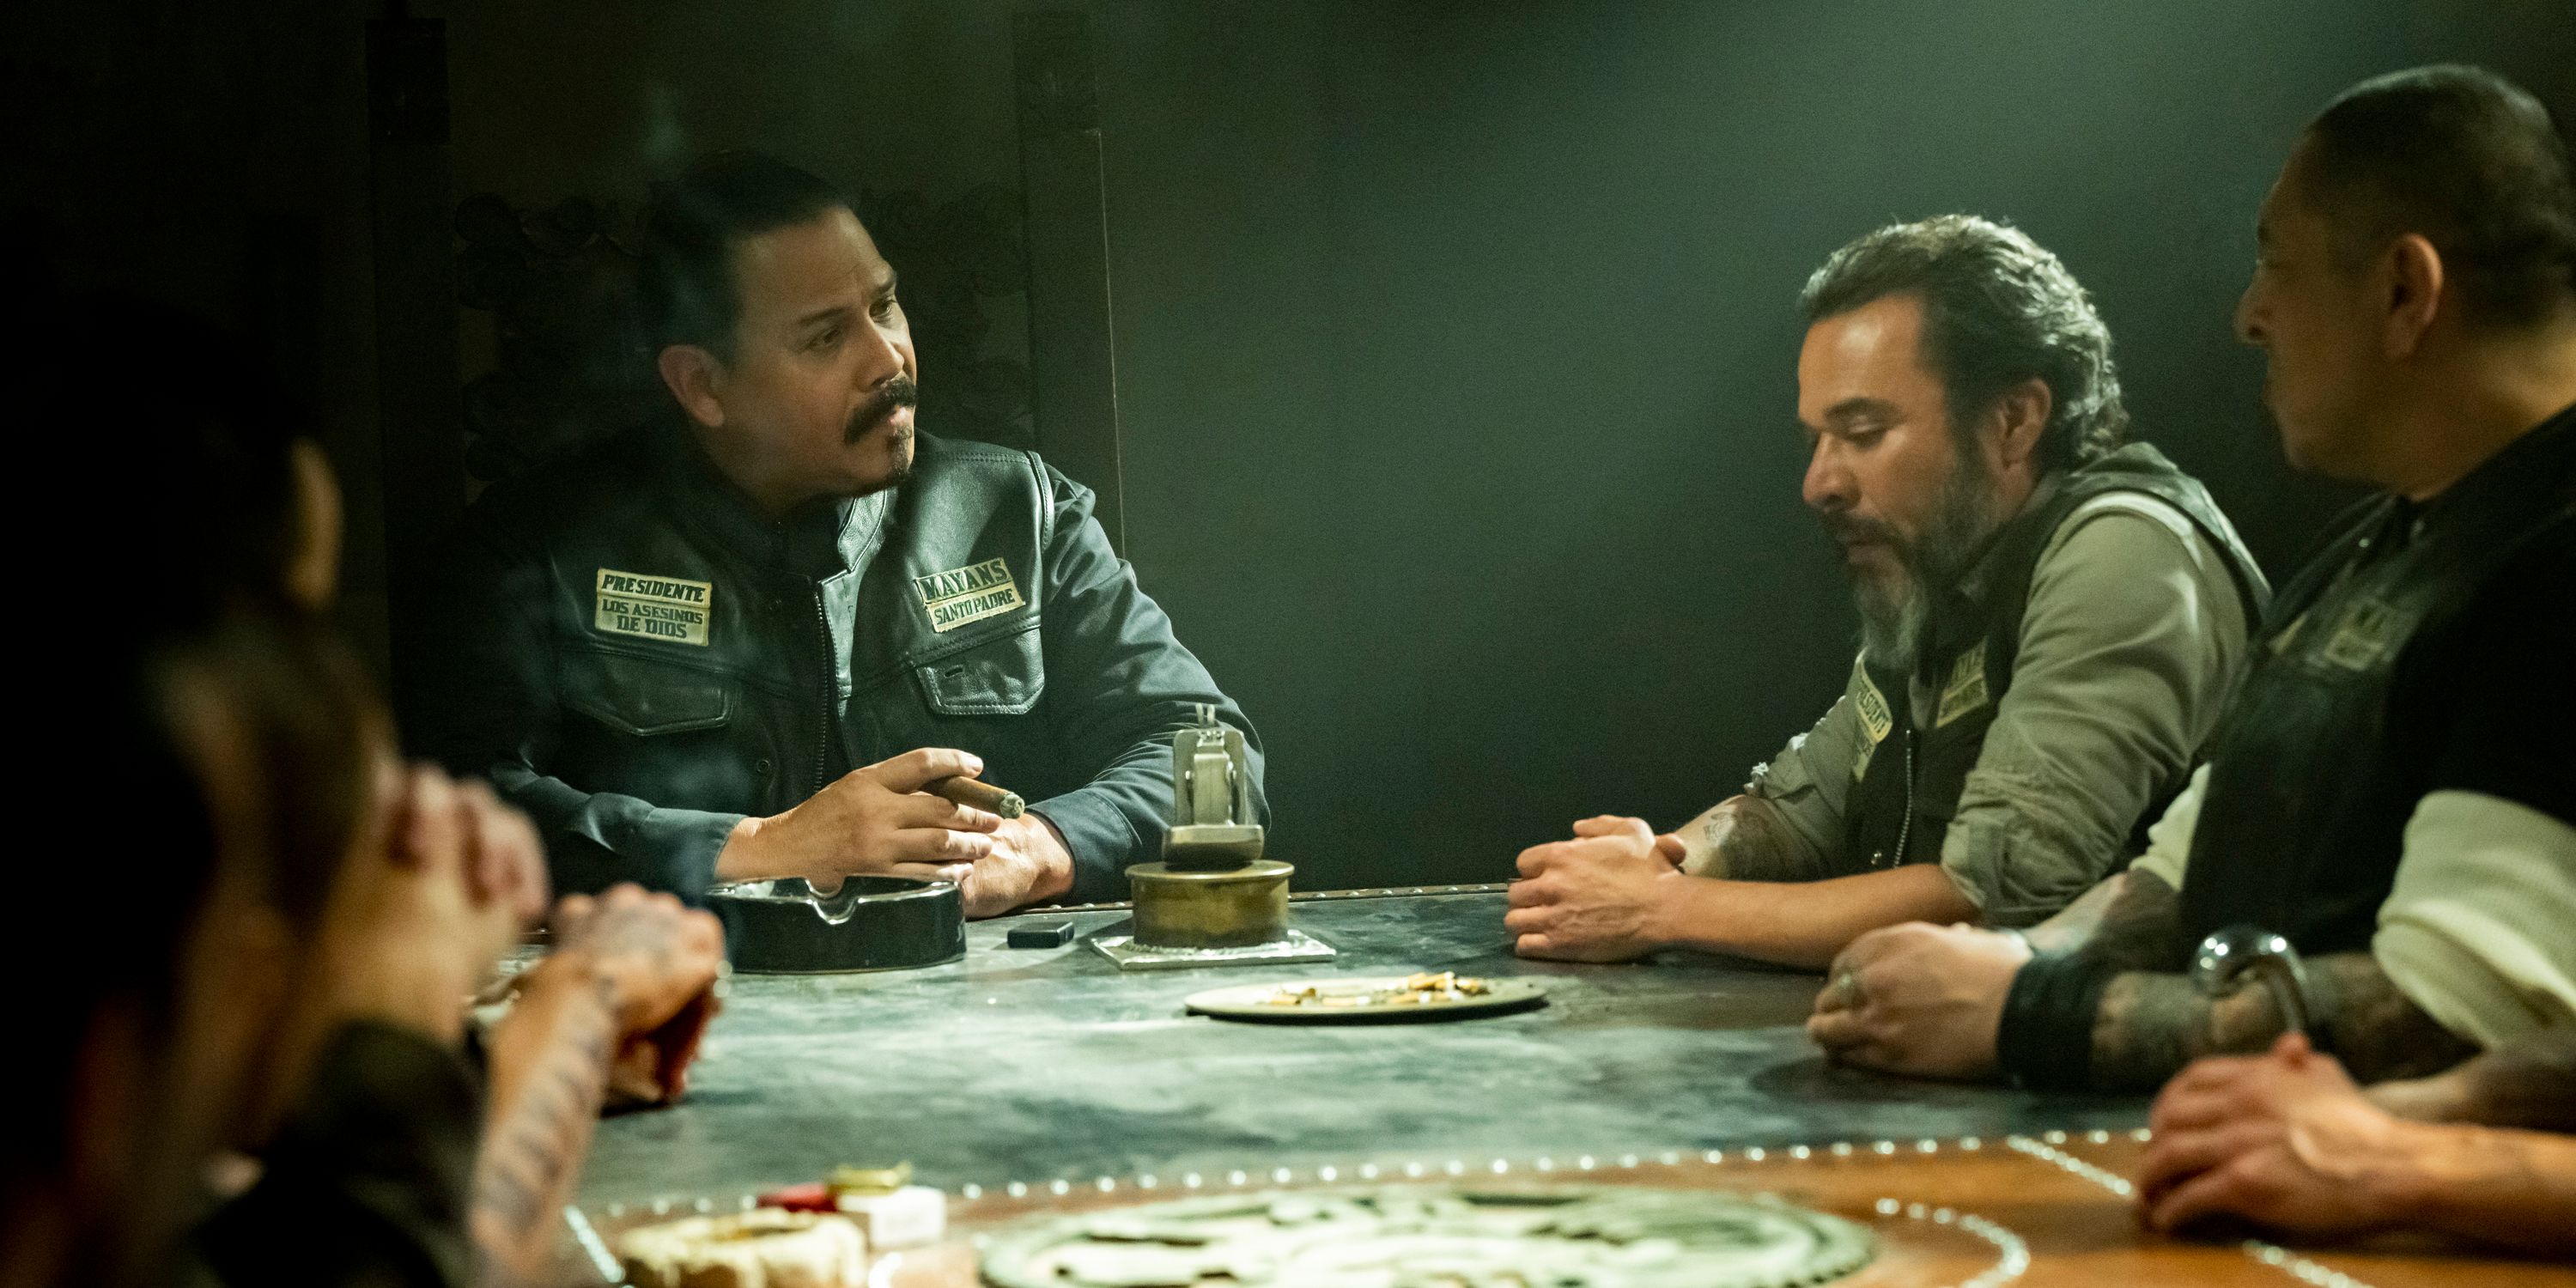 Several members of the Mayans M.C. club sitting around a table.